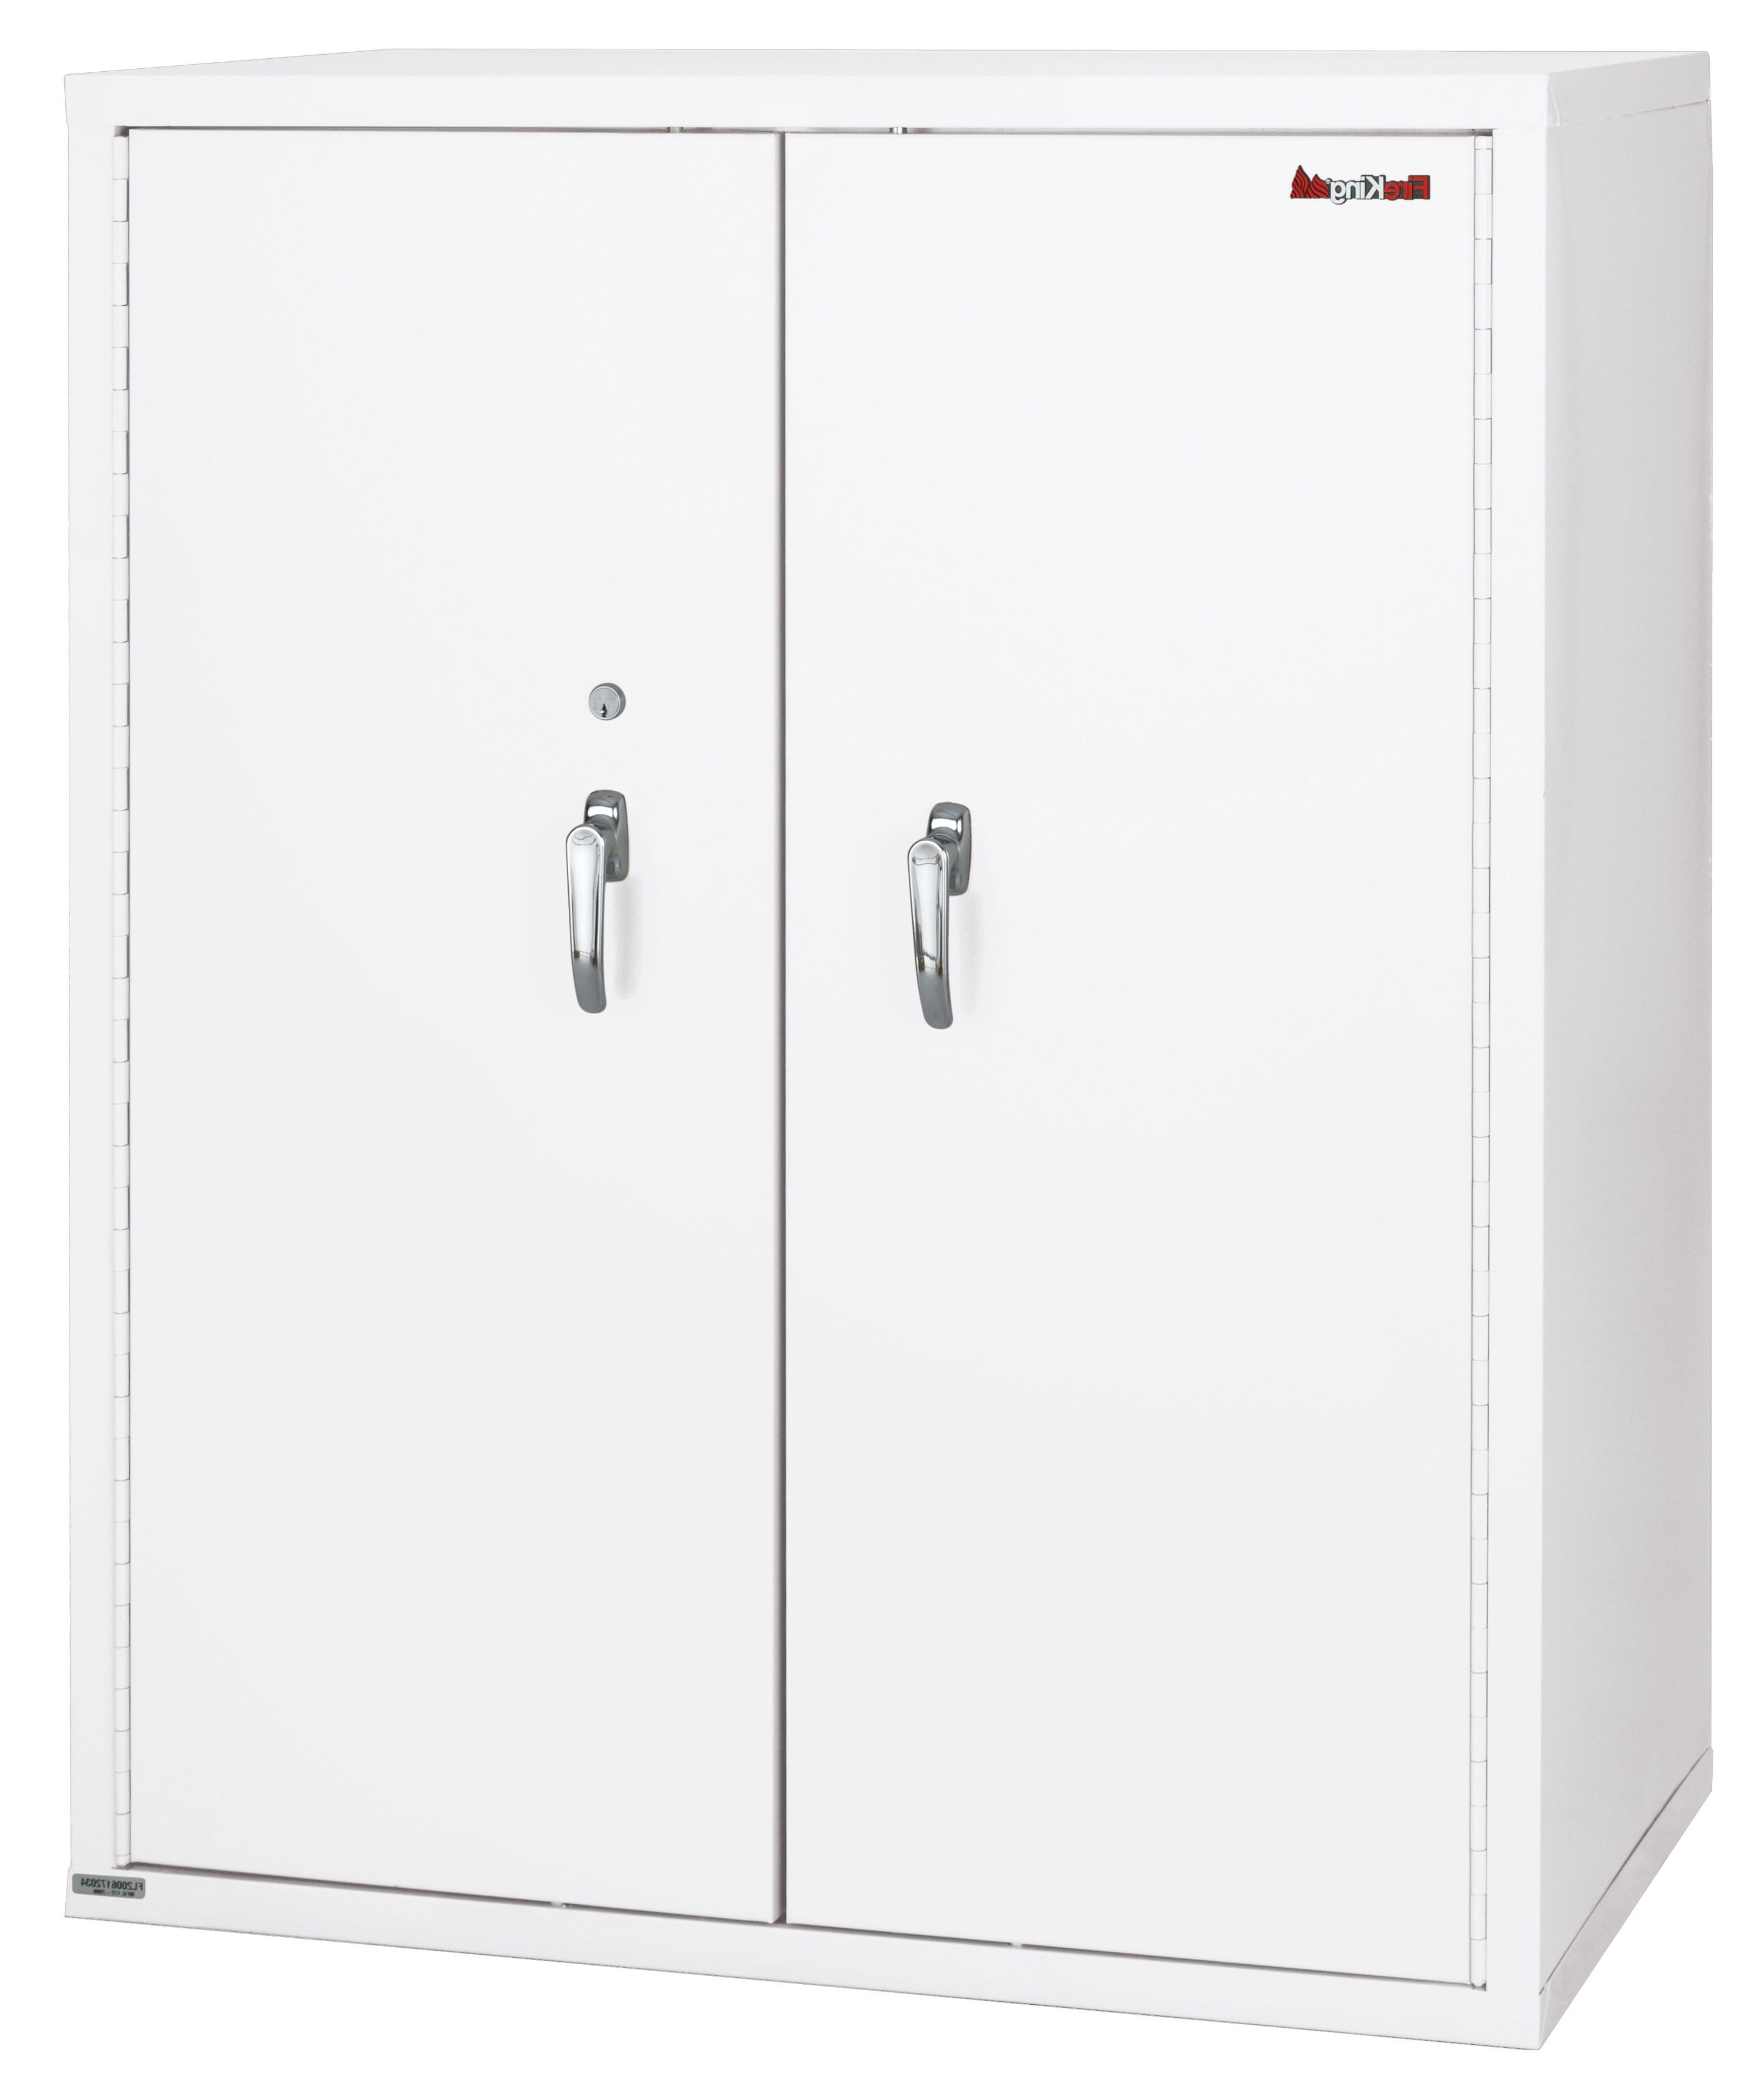 Fireking 44" Height Fireproof Storage Cabinet With Adjustable Shelves Arctic  White – Walmart Throughout Arctic White Wardrobes (View 12 of 20)